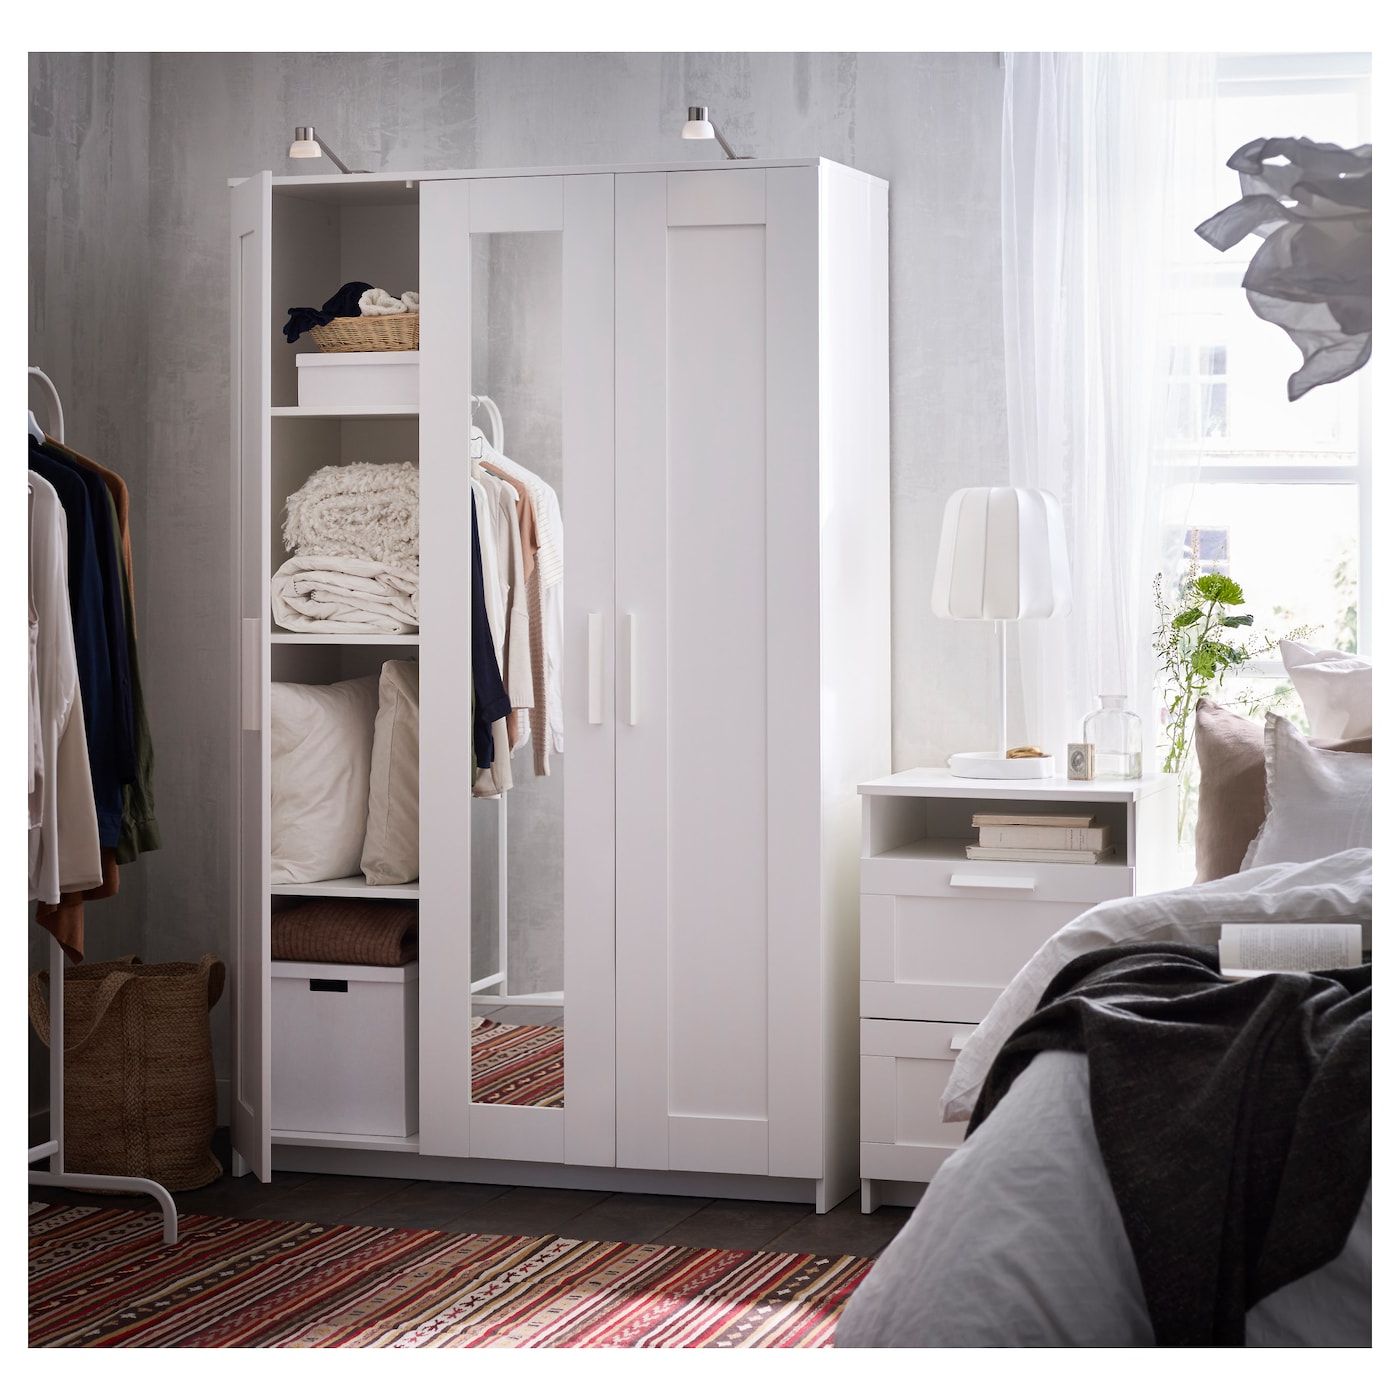 Brimnes White, Wardrobe With 3 Doors, 117x190 Cm – Ikea For White 3 Door Wardrobes With Drawers (Gallery 8 of 20)